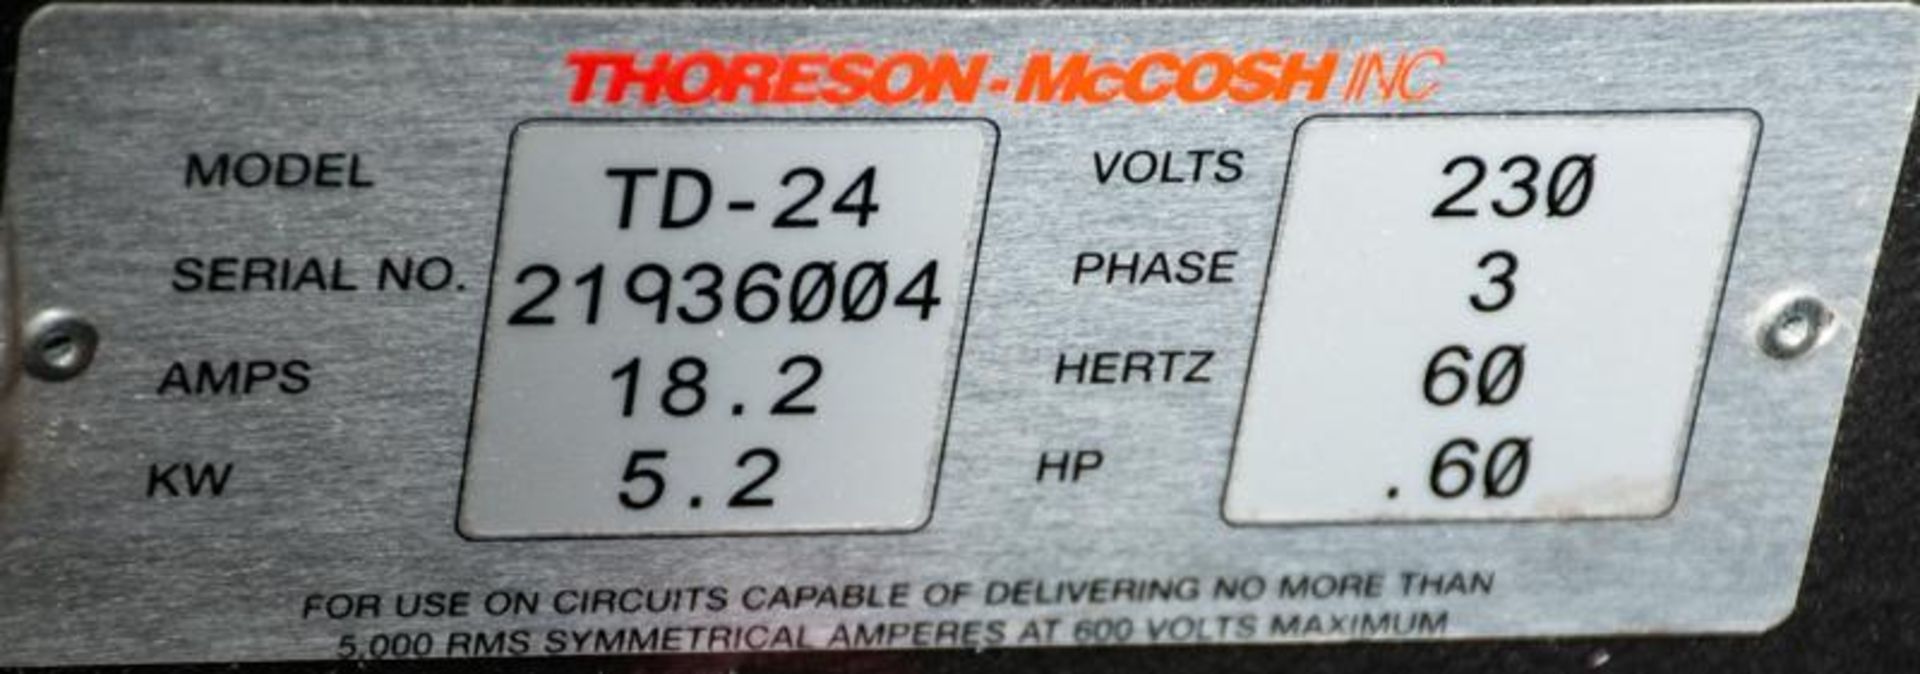 Thoreson-McCash TD-24 Dryer S/N: 21936004. 230v 3ph, Closed Loop Non-Valve Drying System - Image 2 of 2